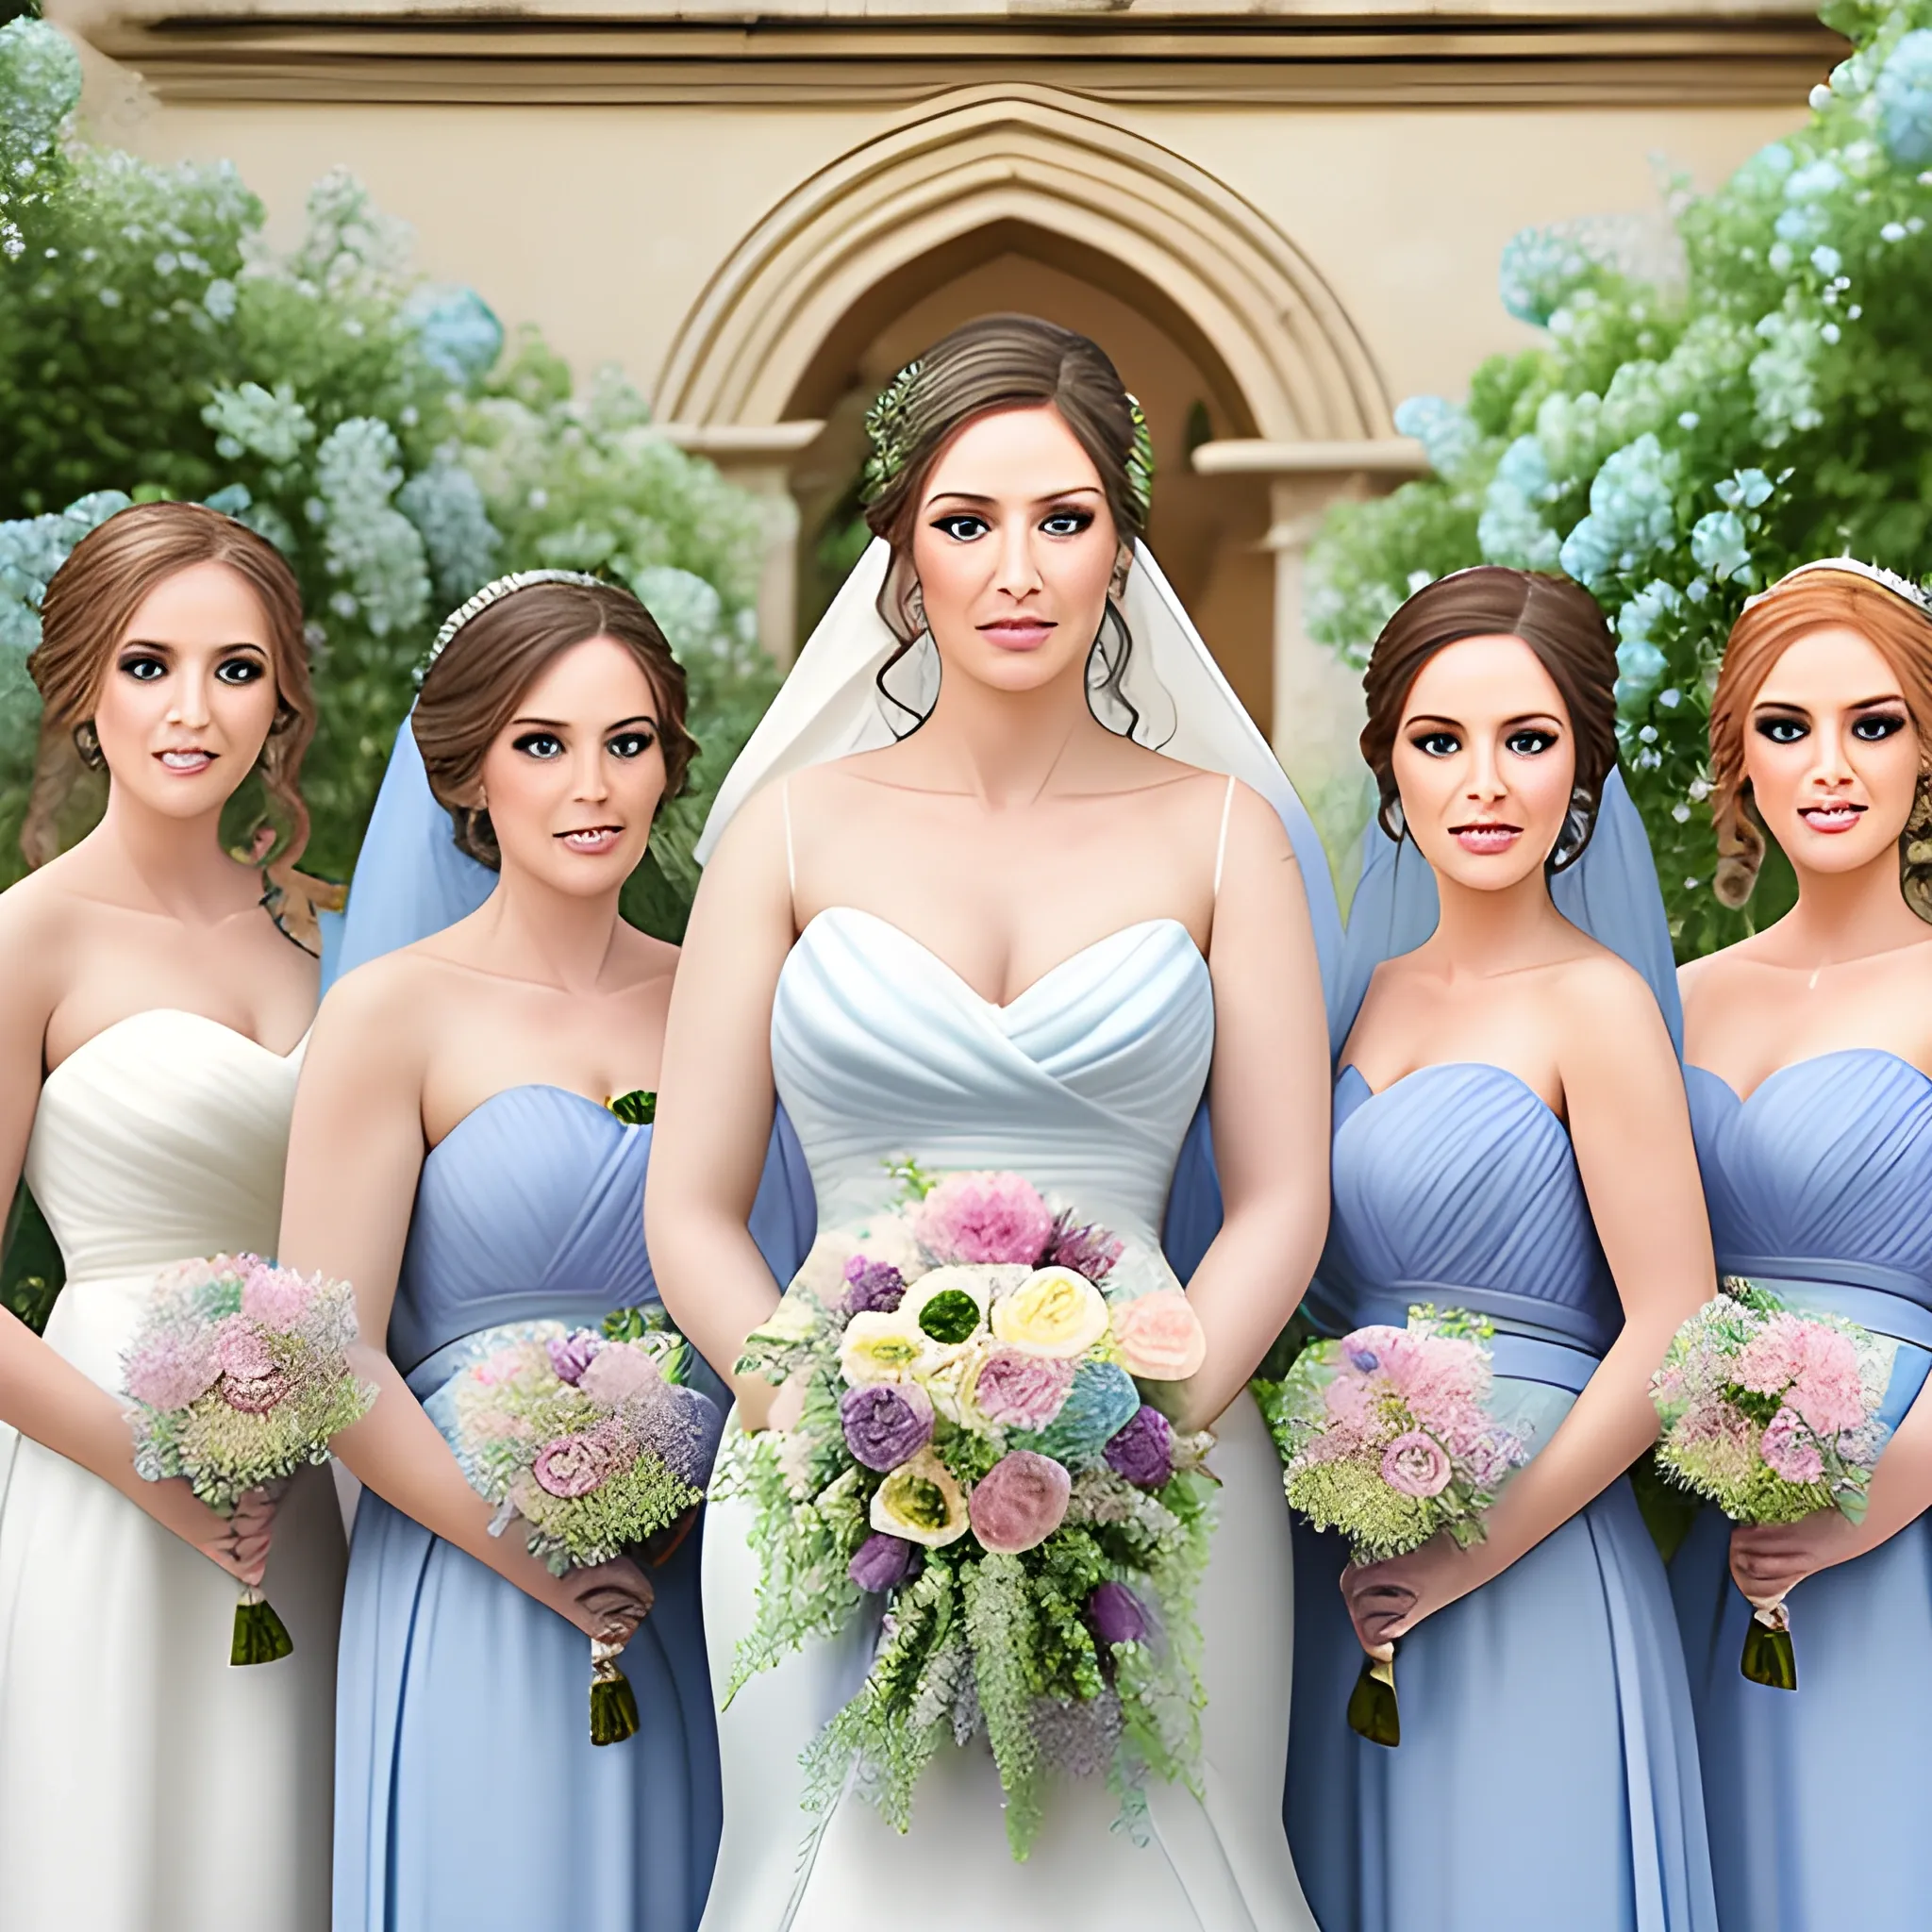 hyper realistic photo wedding bride and 7 bridesmaids with their bouquets, which are made up of dusty miller, terracotta roses, light blue delphinium, and ivory dahlias